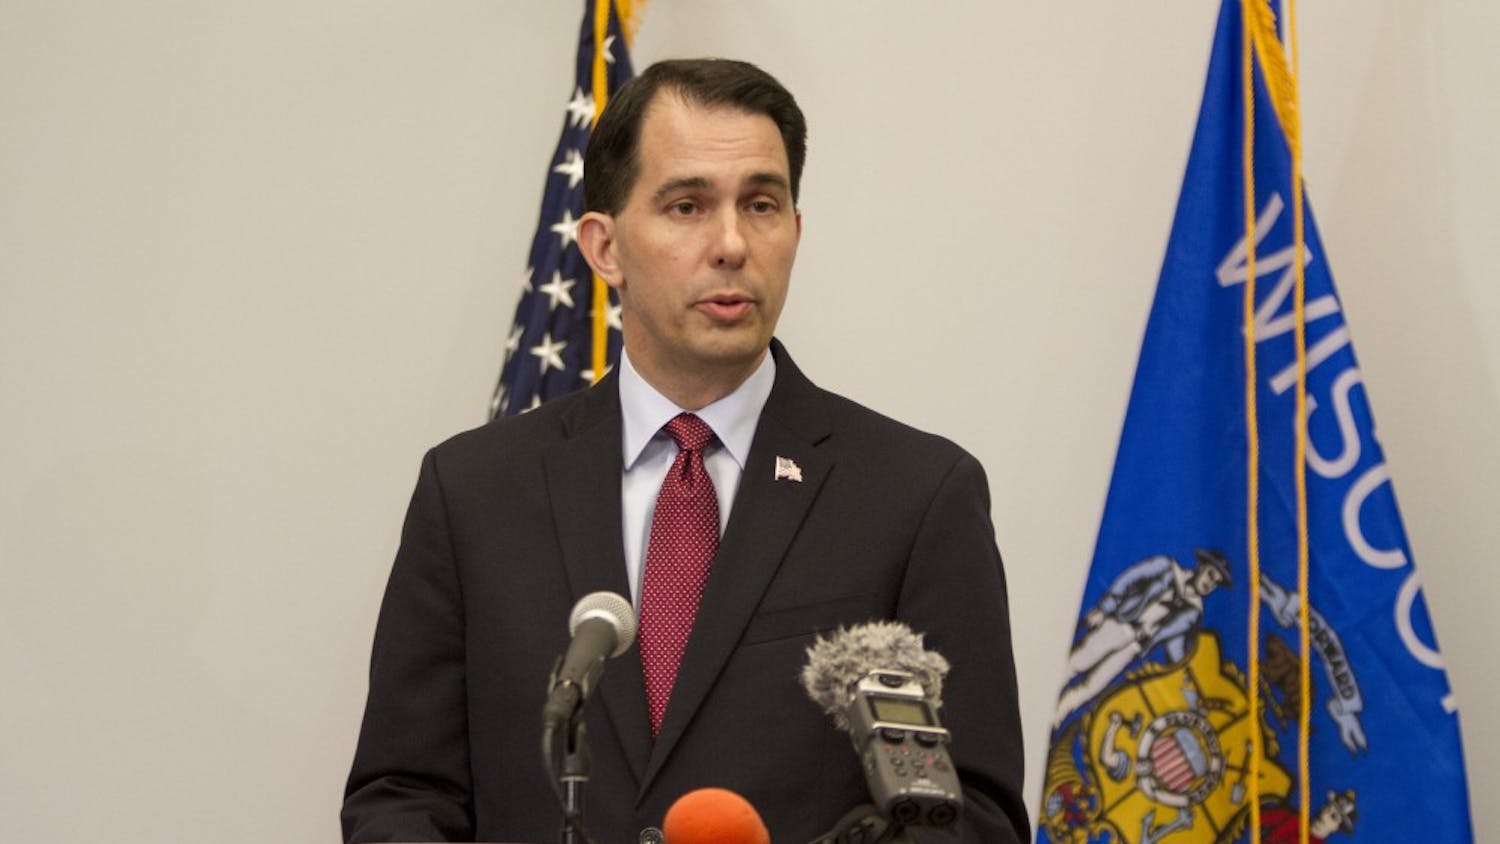 As the system struggles under the weight of a dramatic increase in children entering foster care, Gov. Scott Walker signed into law key pieces of the state’s “Foster Forward” plan.